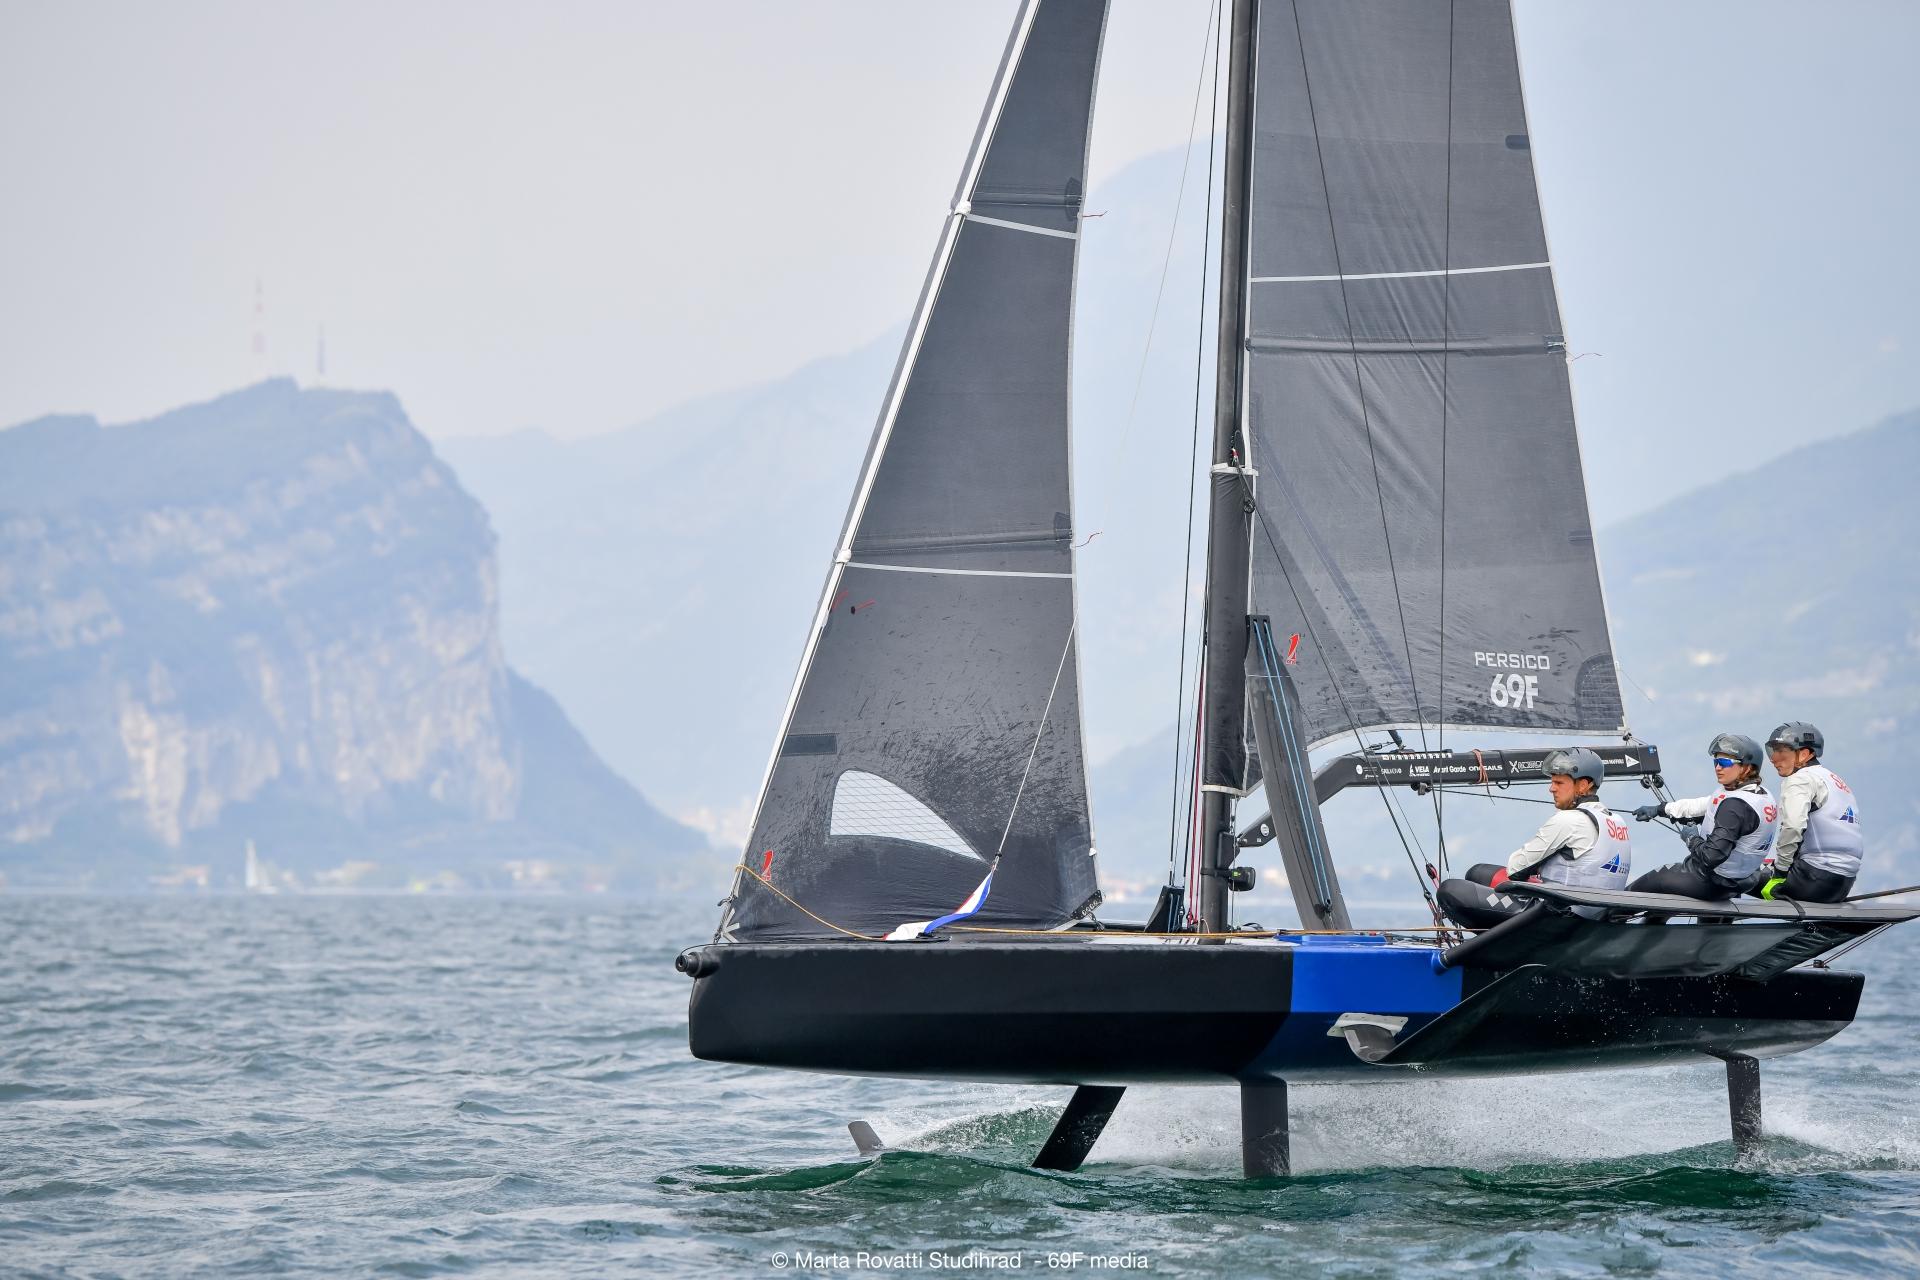 Young Azzurra in Malcesine for Grand Prix 1 of the Persico 69F Cup - News - Yacht Club Costa Smeralda